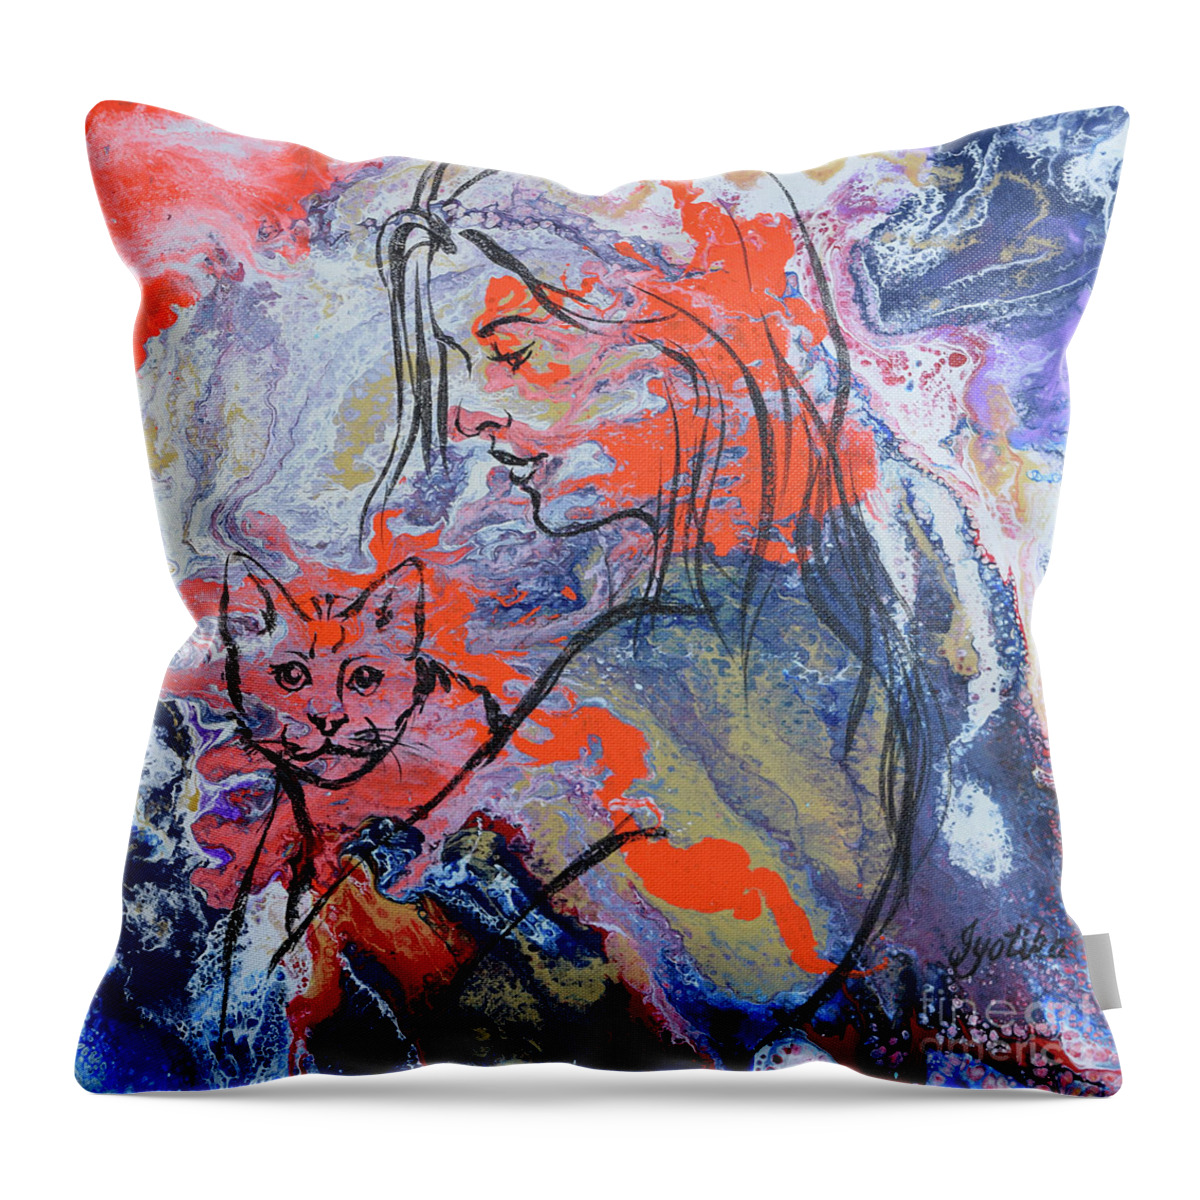  Throw Pillow featuring the painting Tender Love by Jyotika Shroff